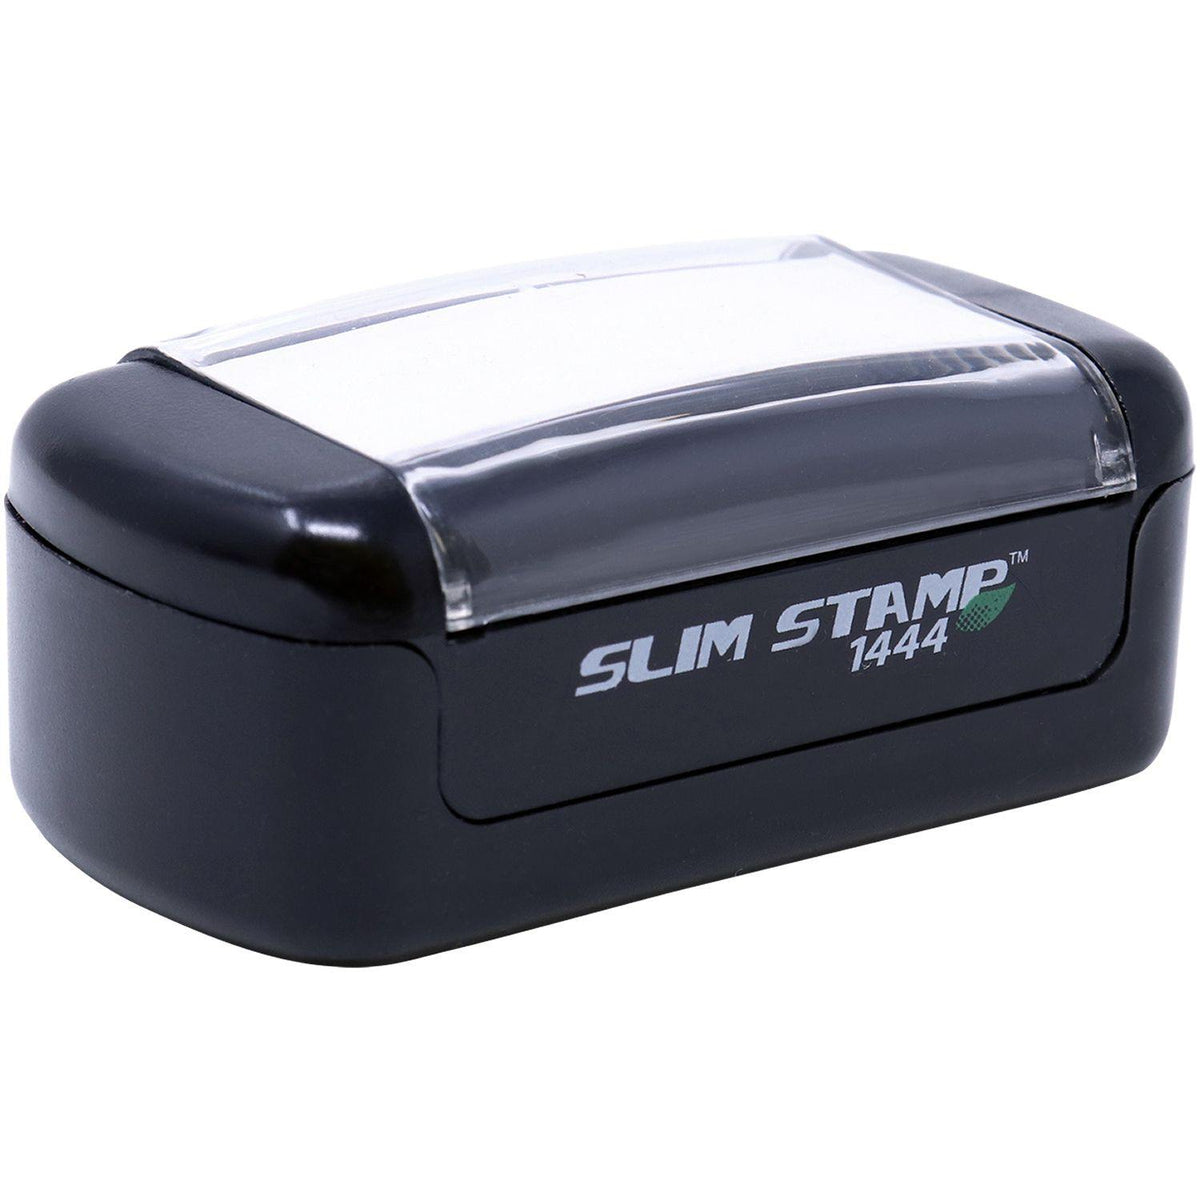 Slim Pre-Inked Bold Allergies Stamp - Engineer Seal Stamps - Brand_Slim, Impression Size_Small, Stamp Type_Pre-Inked Stamp, Type of Use_Medical Office